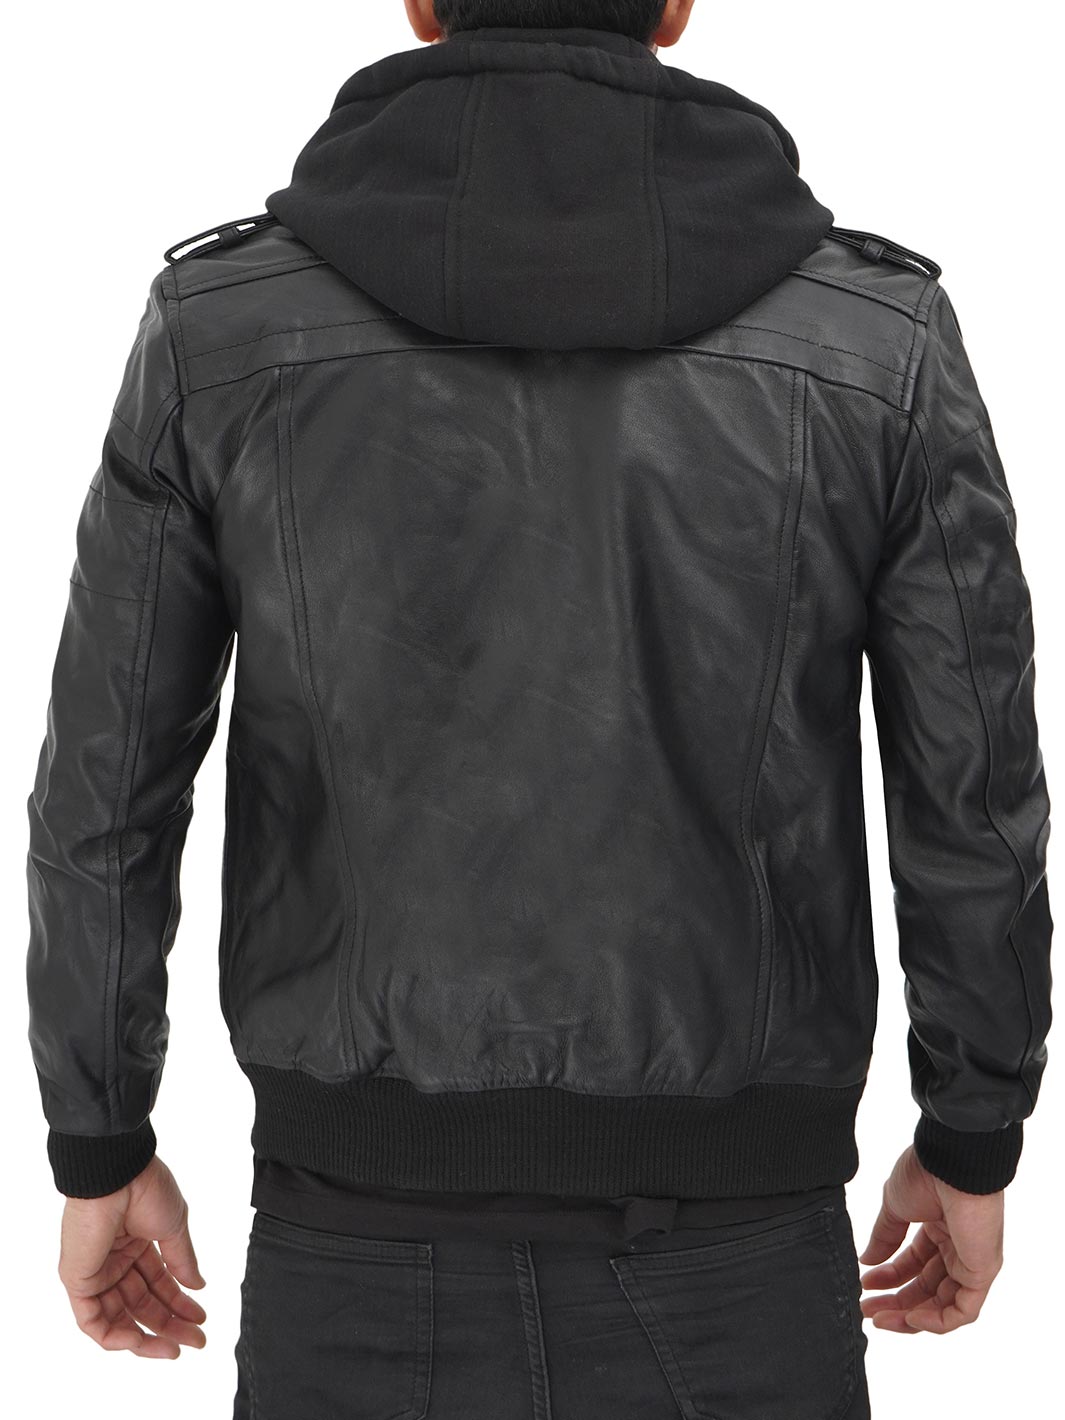 Mens Black Bomber Leather Jacket With Removable Hood – Decrum